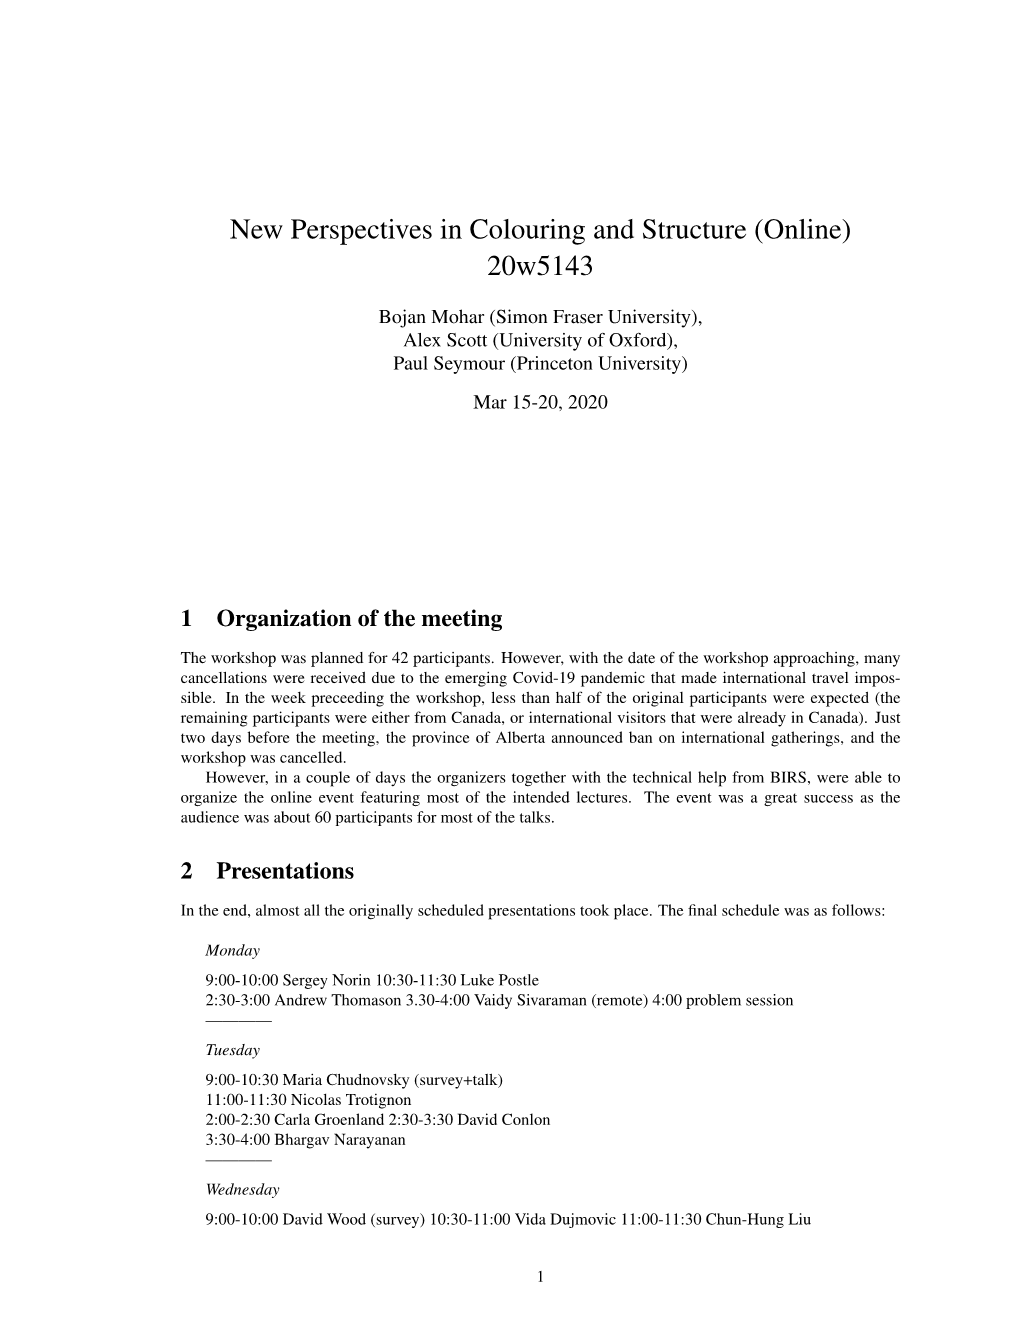 New Perspectives in Colouring and Structure (Online) 20W5143